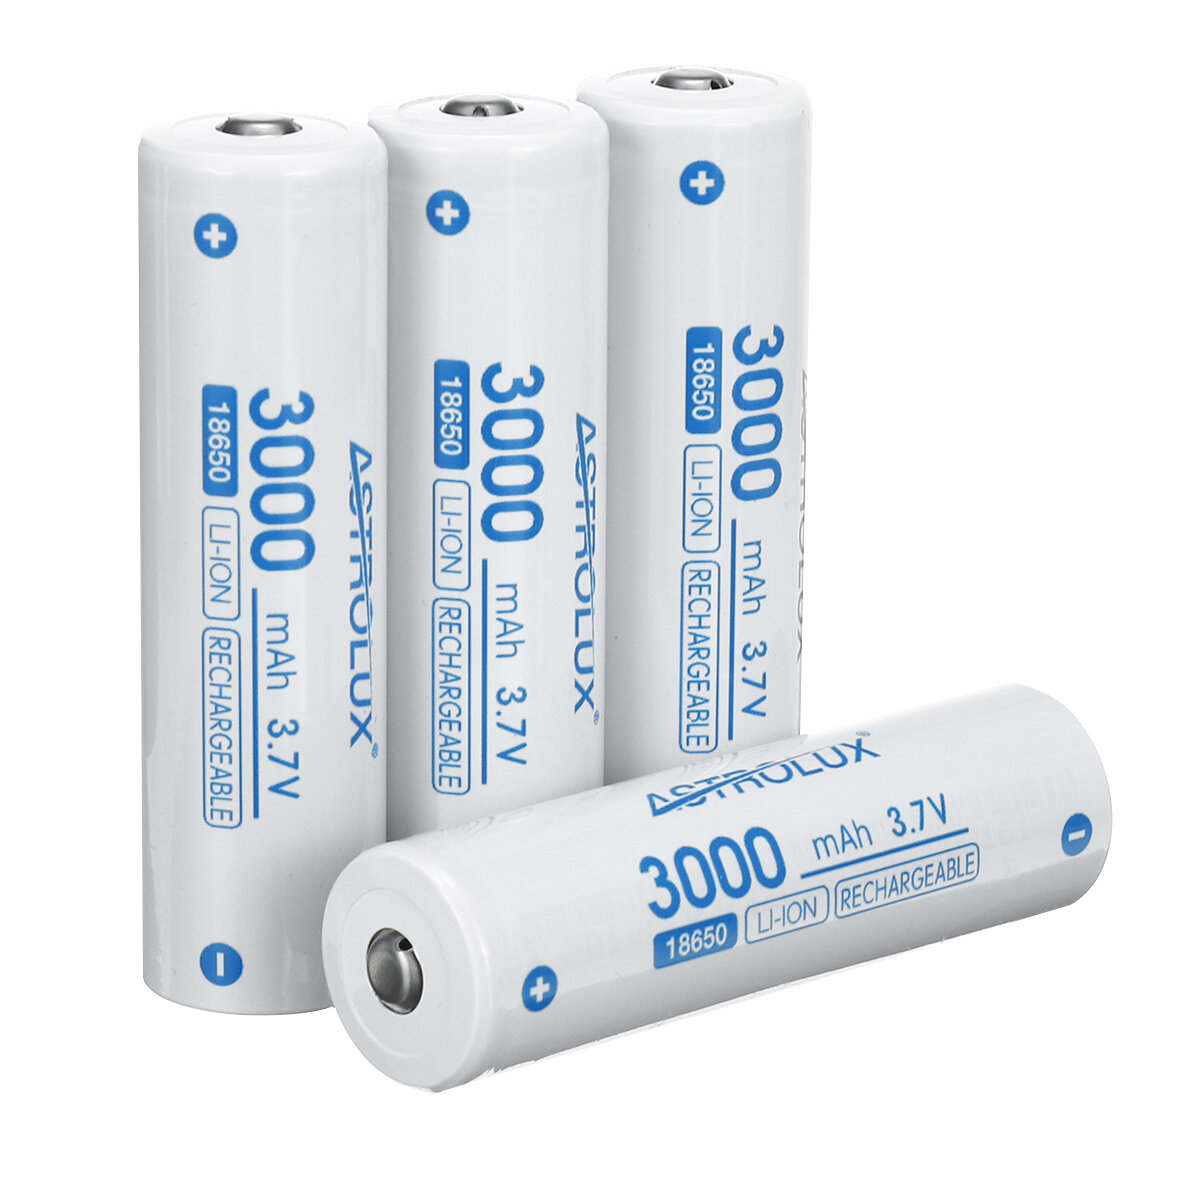 

4Pcs Astrolux® C1830 3000mAh 3.7V 18650 Unprotected Li-ion Battery Rechargeable Lithium Power Cell 9.6A High Performance